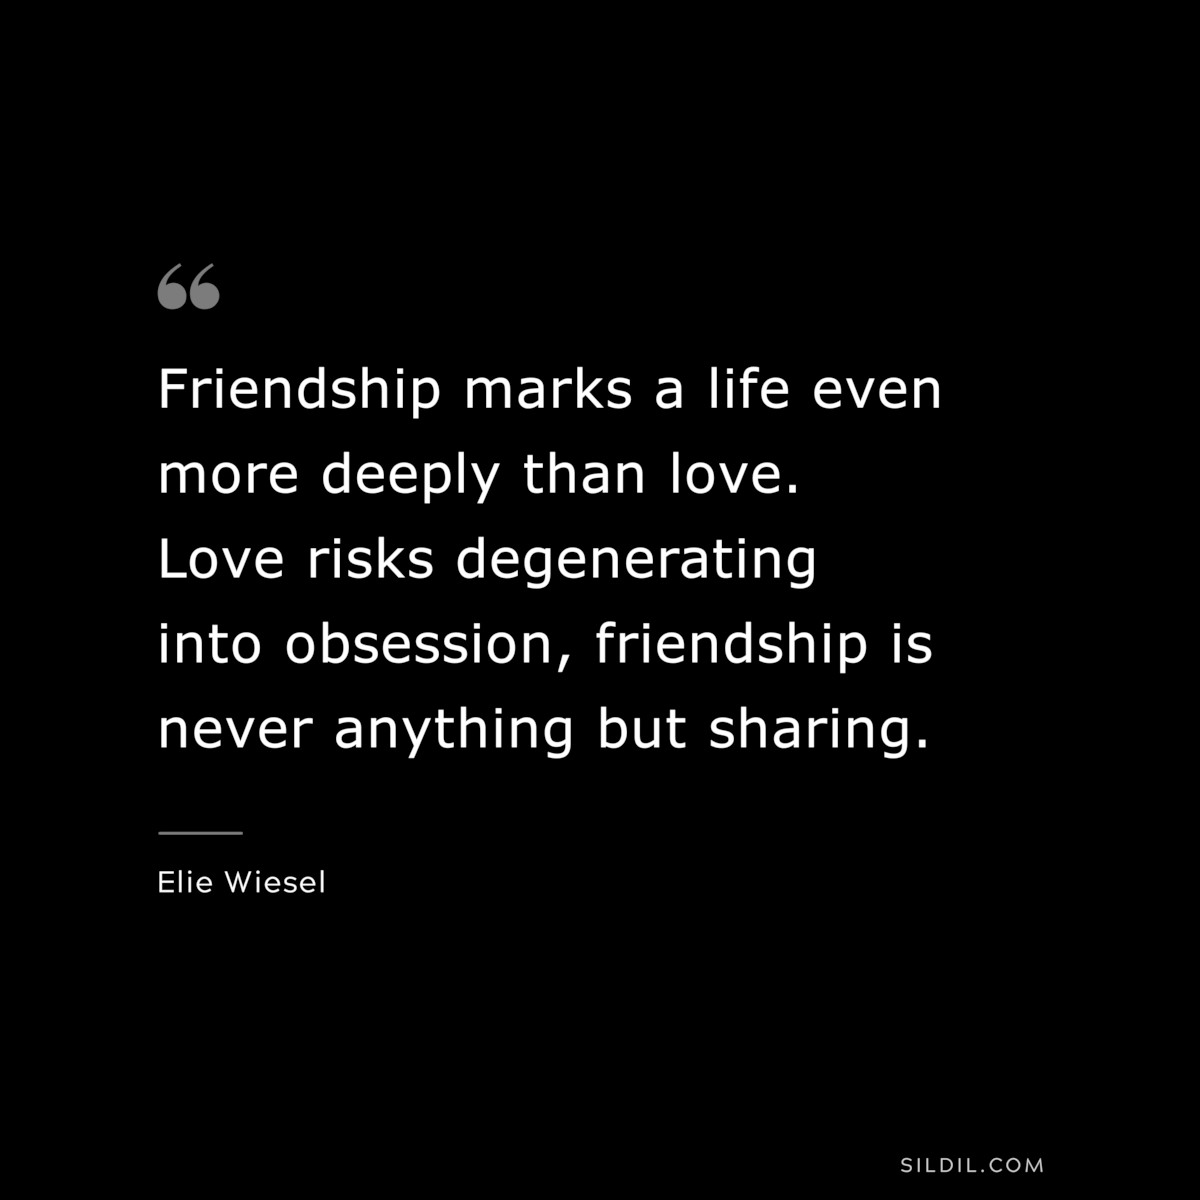 Friendship marks a life even more deeply than love. Love risks degenerating into obsession, friendship is never anything but sharing. ― Elie Wiesel